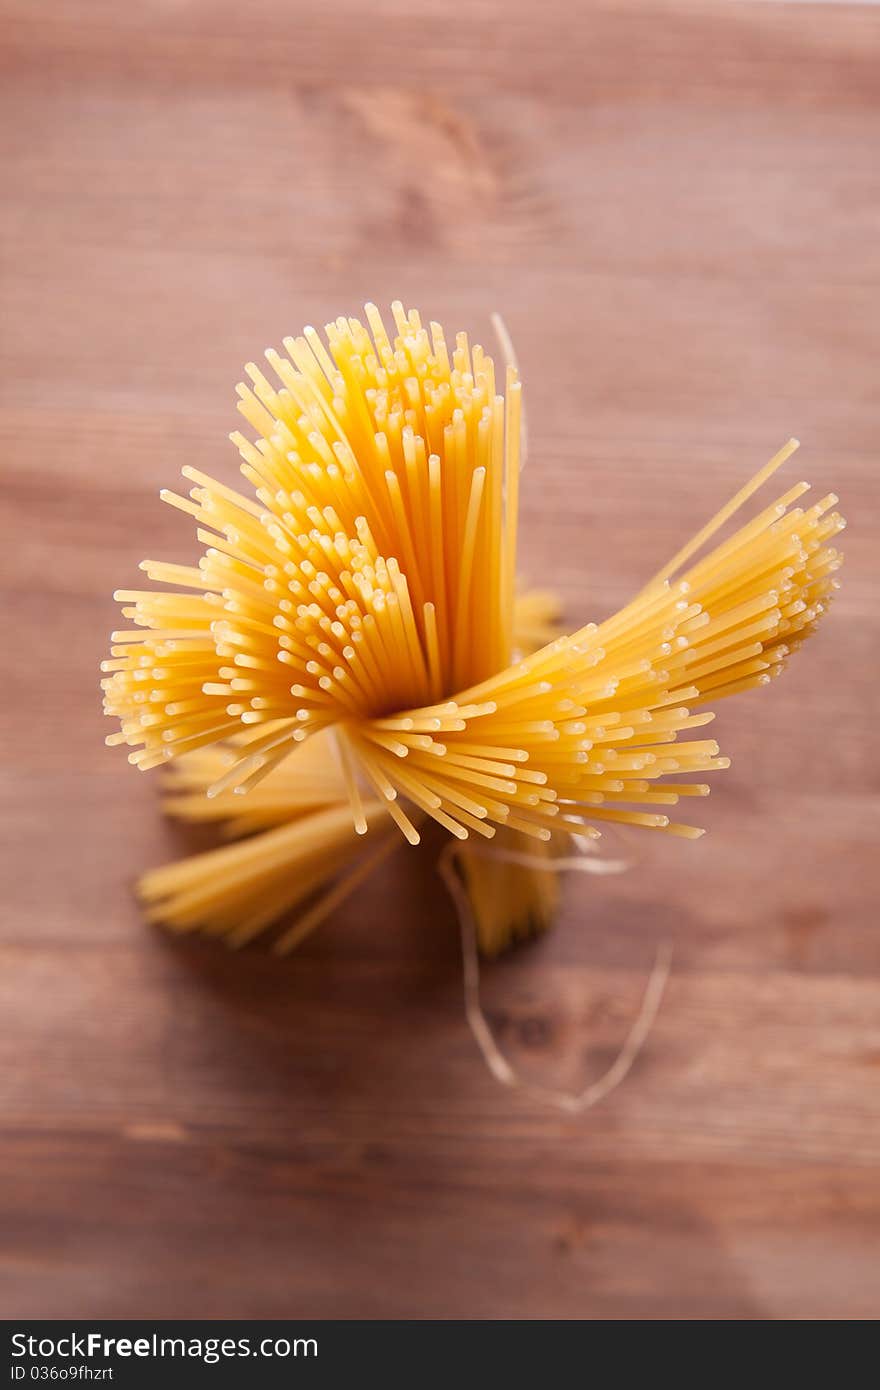 Bunch of spaghetti on a wooden table